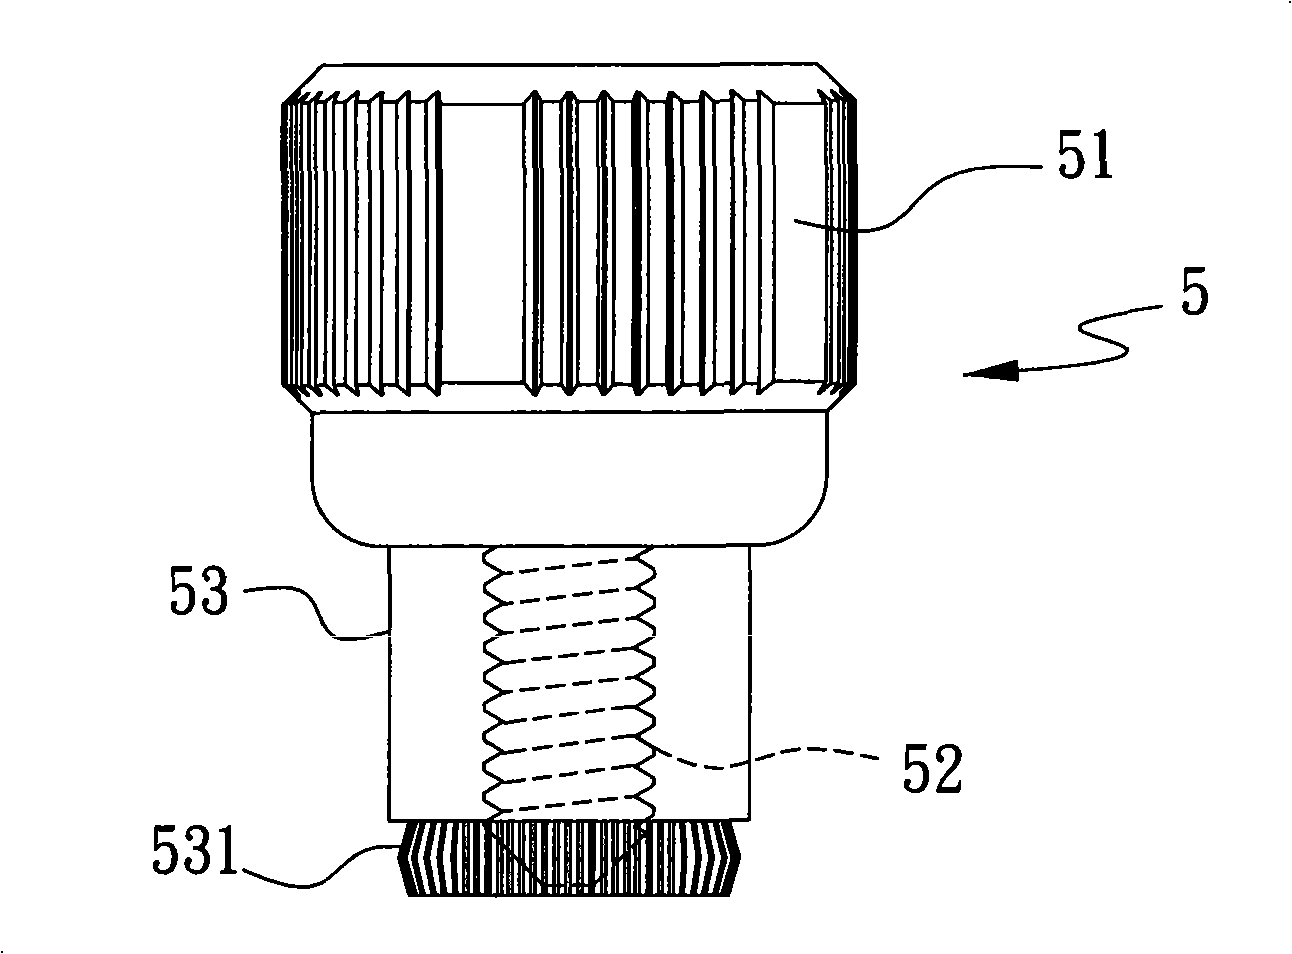 Packaging method for combining screw to printed circuit board